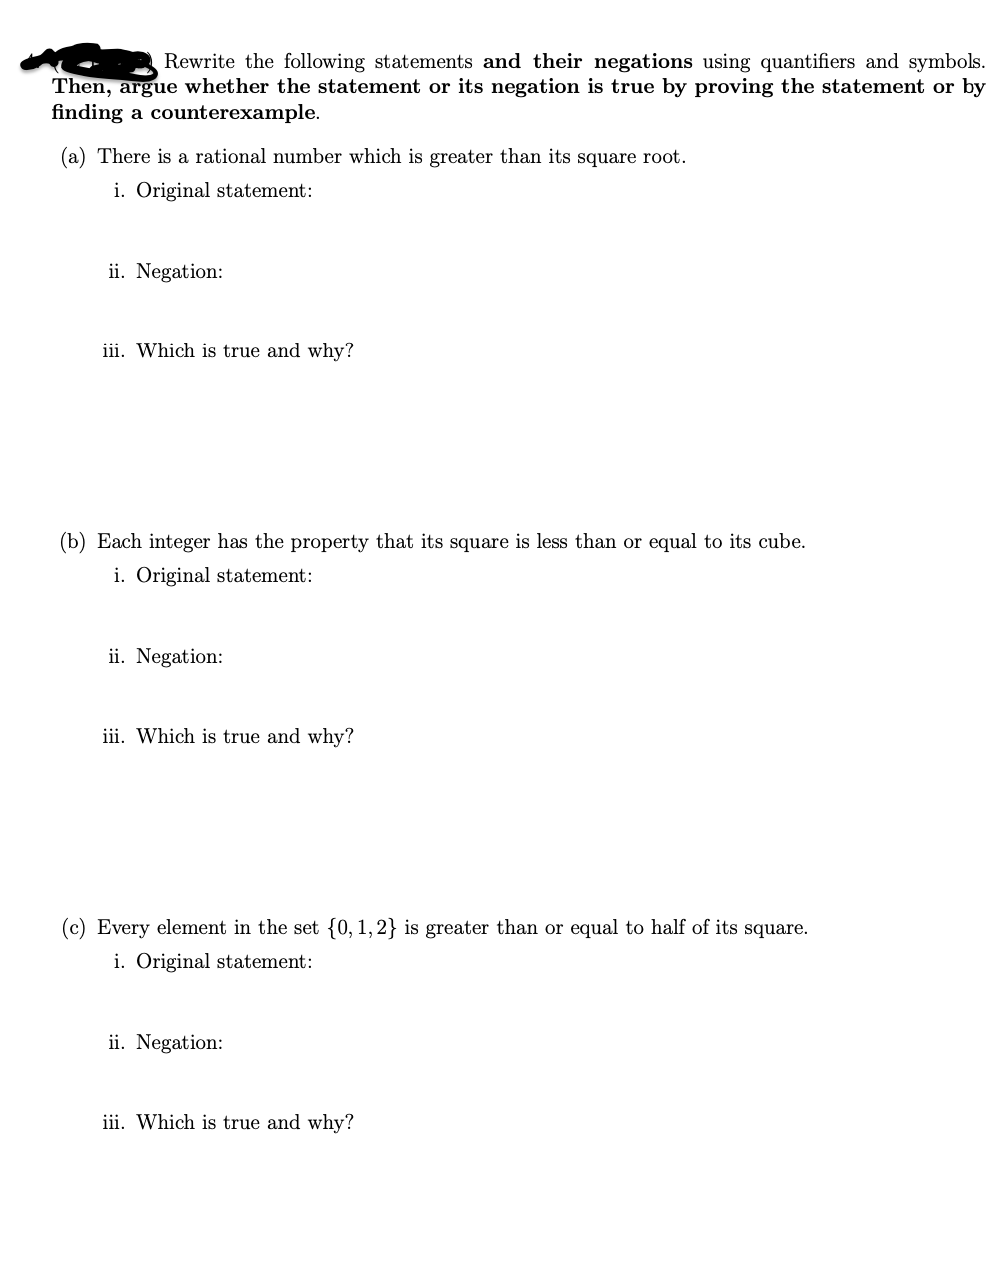 Rewrite the following statements and their negations using quantifiers and symbols.
Then, argue whether the statement or its negation is true by proving the statement or by
finding a counterexample.
(a) There is a rational number which is greater than its square root.
i. Original statement:
ii. Negation:
iii. Which is true and why?
(b) Each integer has the property that its square is less than or equal to its cube.
i. Original statement:
ii. Negation:
iii. Which is true and why?
(c) Every element in the set {0, 1,2} is greater than or equal to half of its square.
i. Original statement:
ii. Negation:
iii. Which is true and why?